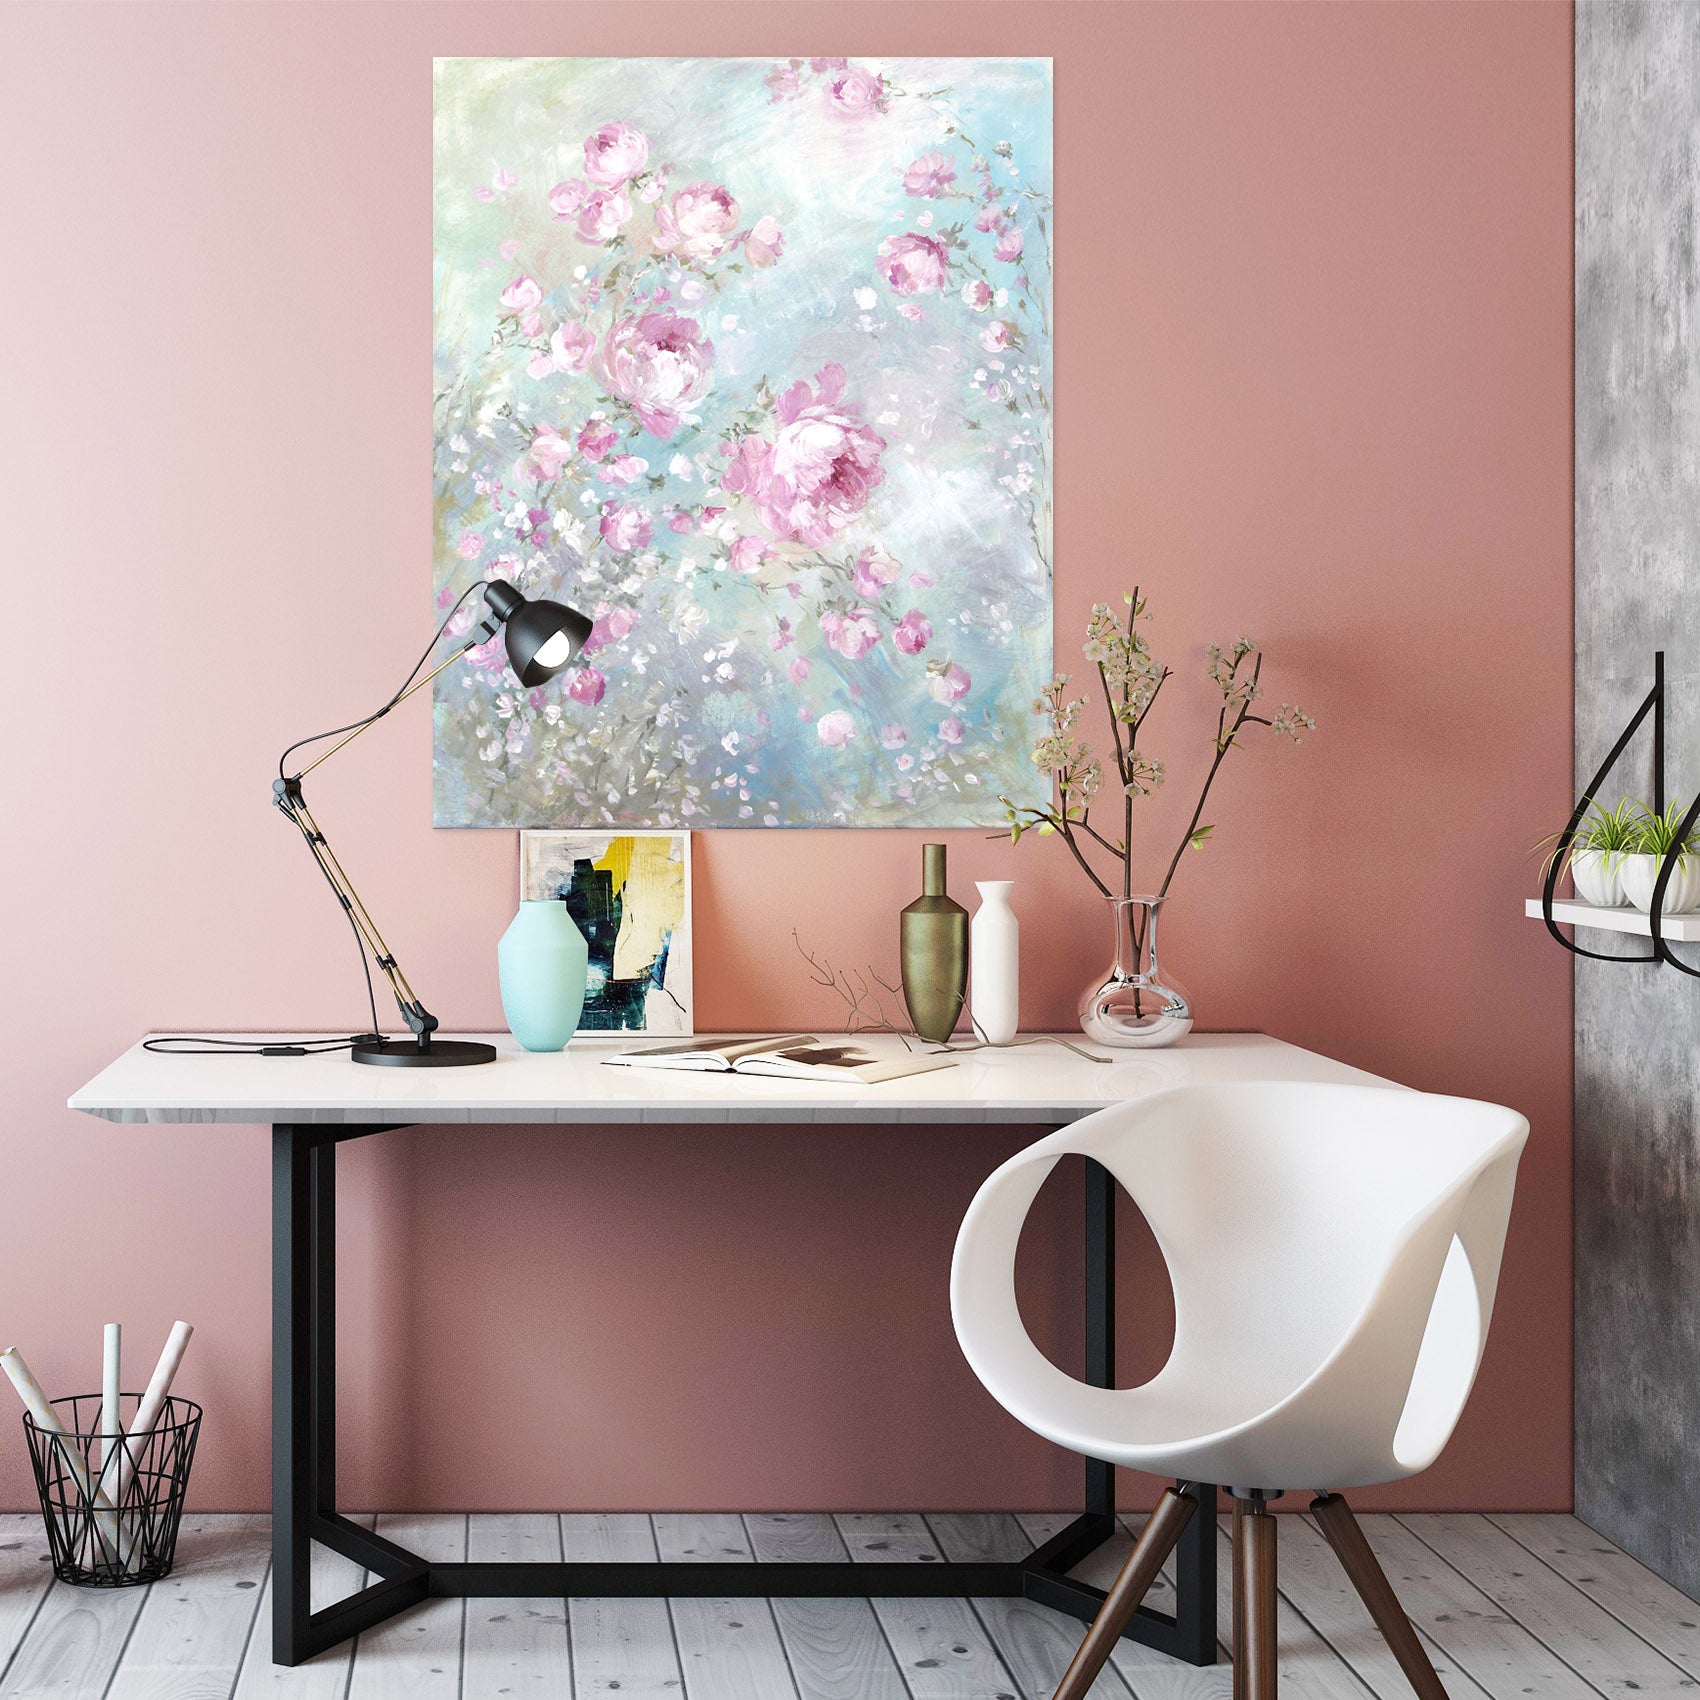 3D Pink Flowers 020 Debi Coules Wall Sticker